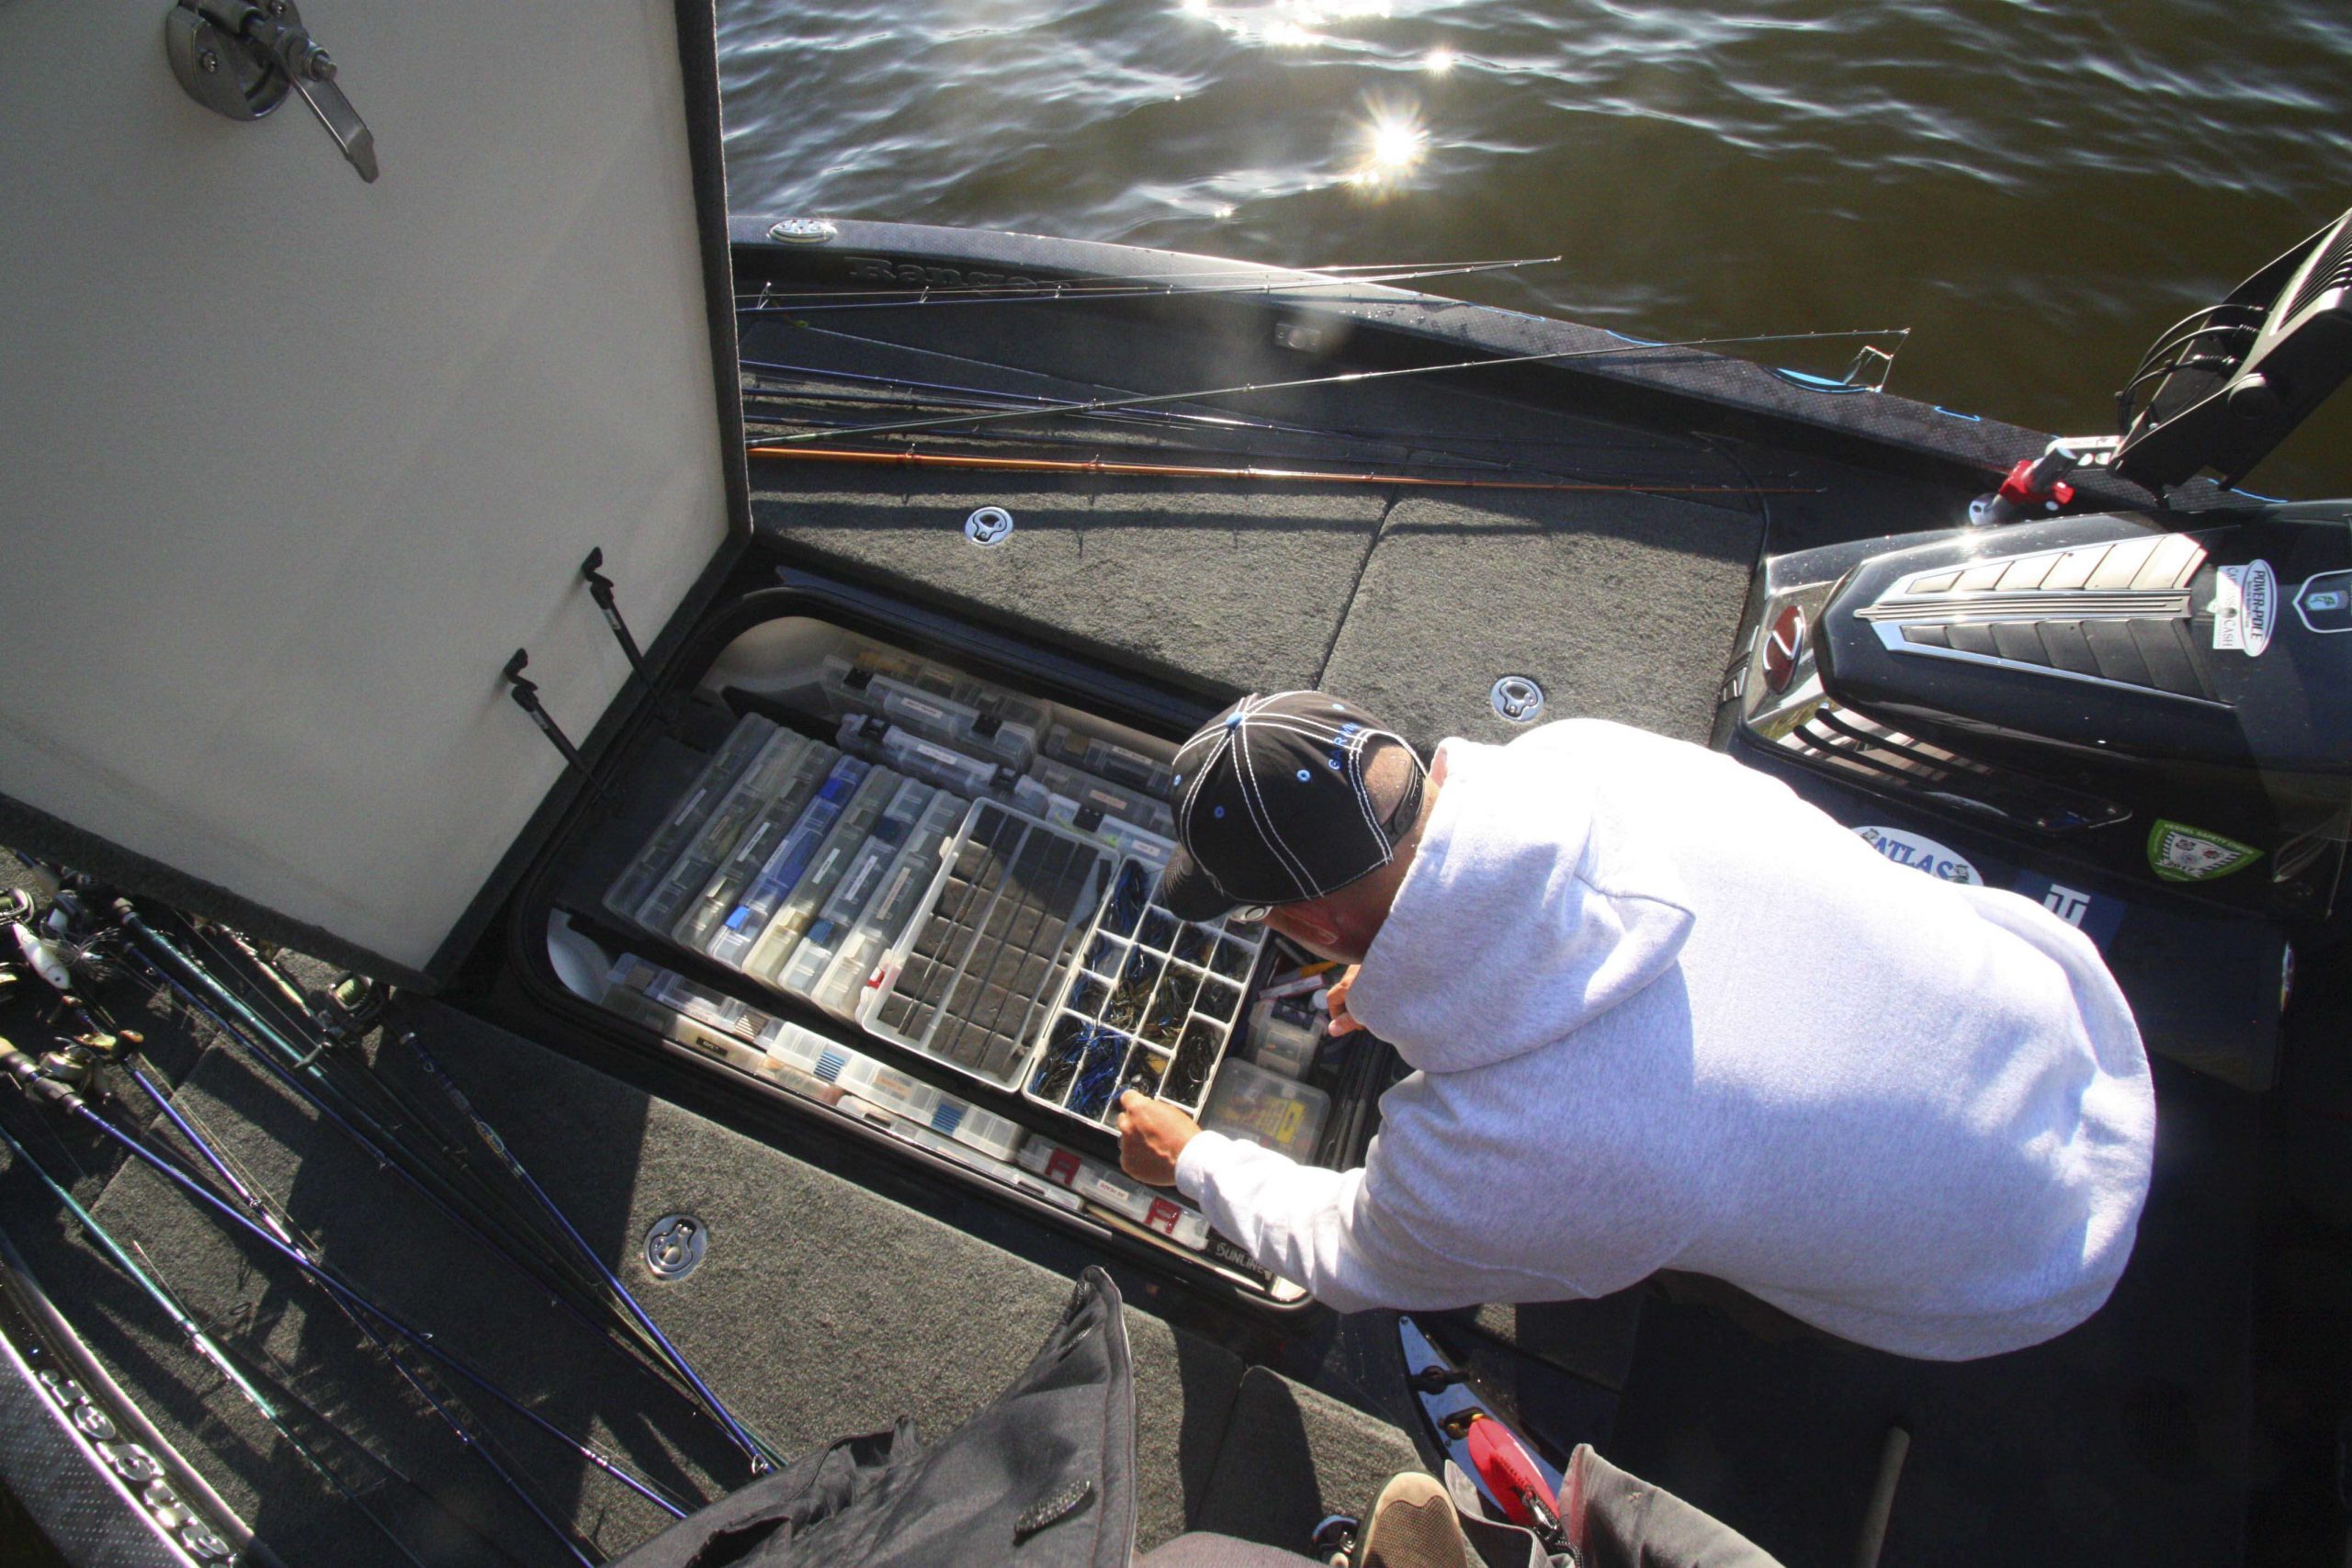 <b>8 a.m.</b> He digs through his tackle stash to find a replacement trailer.<br>
<b>8:03 a.m.</b> Grigsby resumes moving uplake while alternating between the jig and spinnerbait.<br>
<b>8:10 a.m.</b> He enters another shallow pocket and pitches the jig around shoreline wood.<br>
<b>8:18 a.m.</b> The wind is howling as Grigsby moves to the opposite shoreline, which is heavily shaded. Here he tries a sexy shad Strike King KVD 1.5 squarebill crankbait.<br>
<b>8:22 a.m.</b> He pitches the jig to a big laydown.